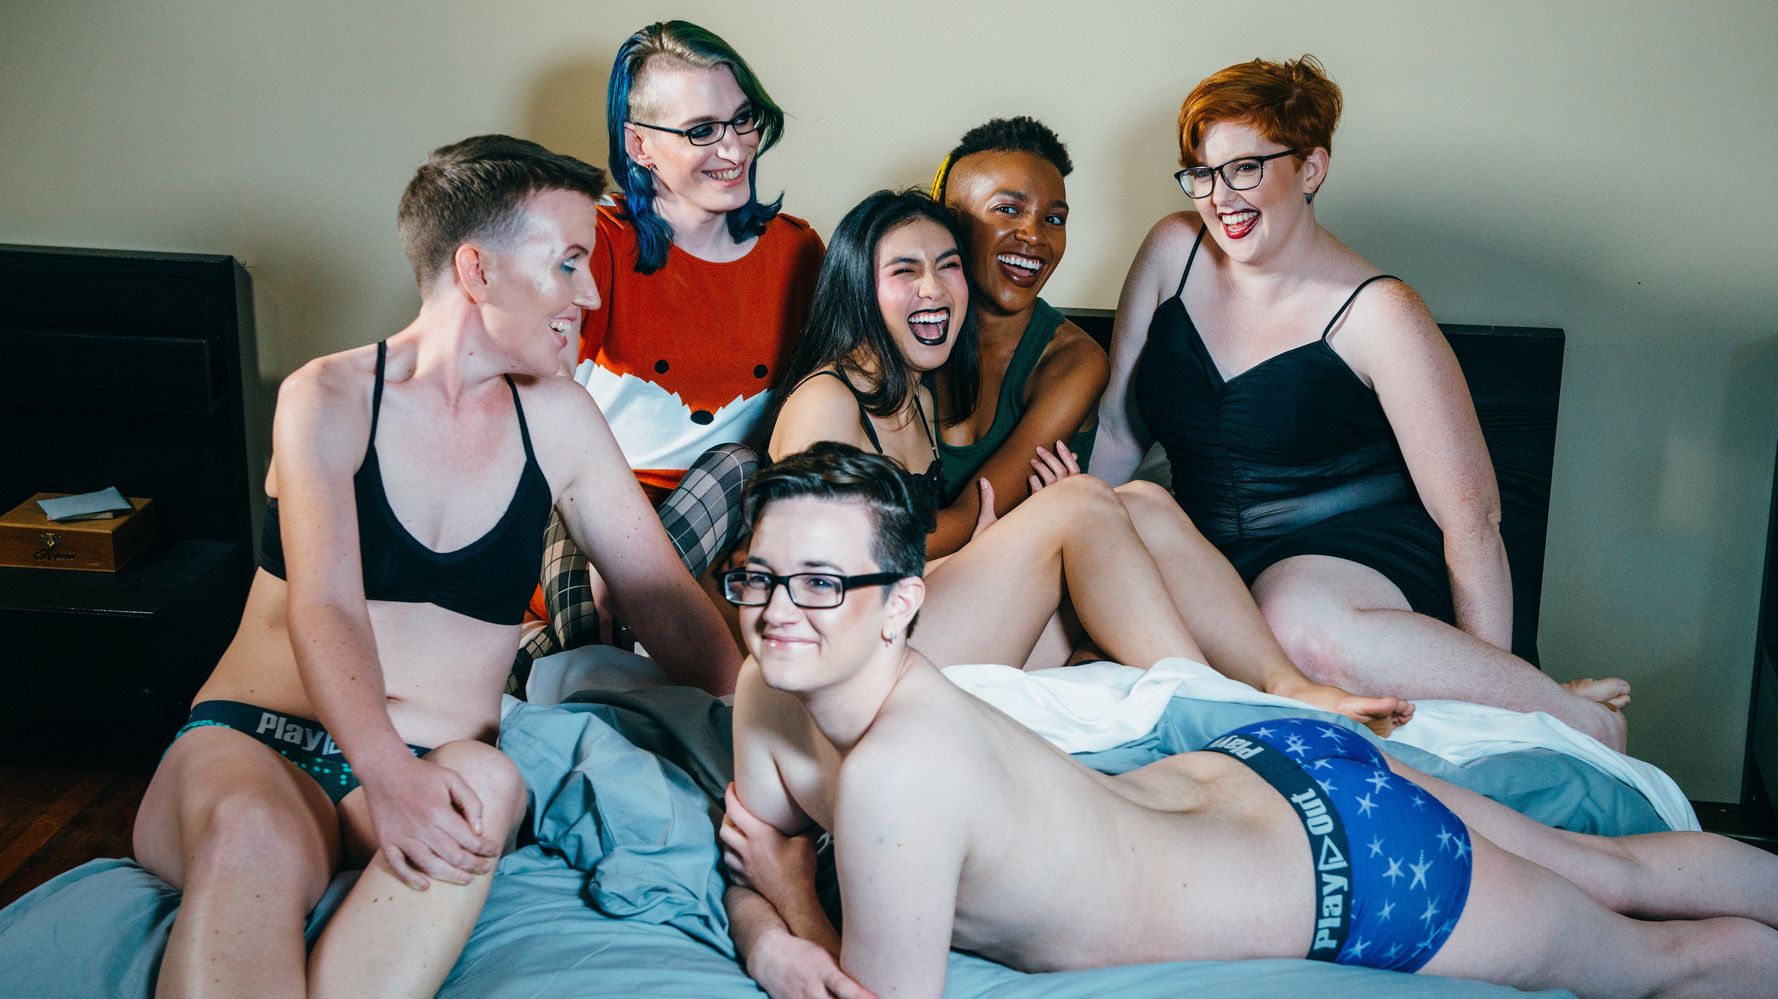 Eight amazing and cute trans lingerie options from independent sellers